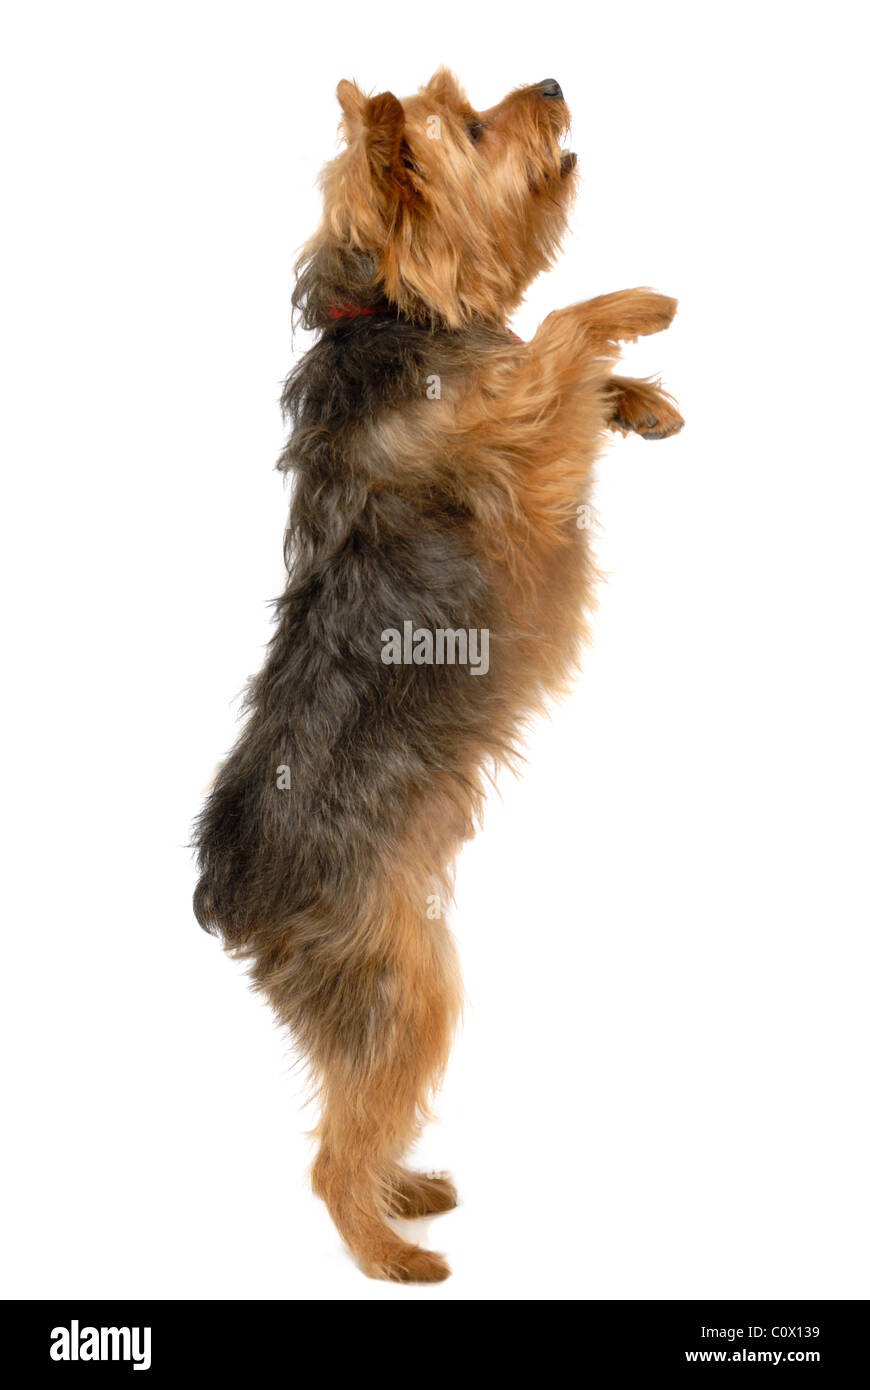 Yorkshire terrier or Yorkie dog, on white background. Stock Photo